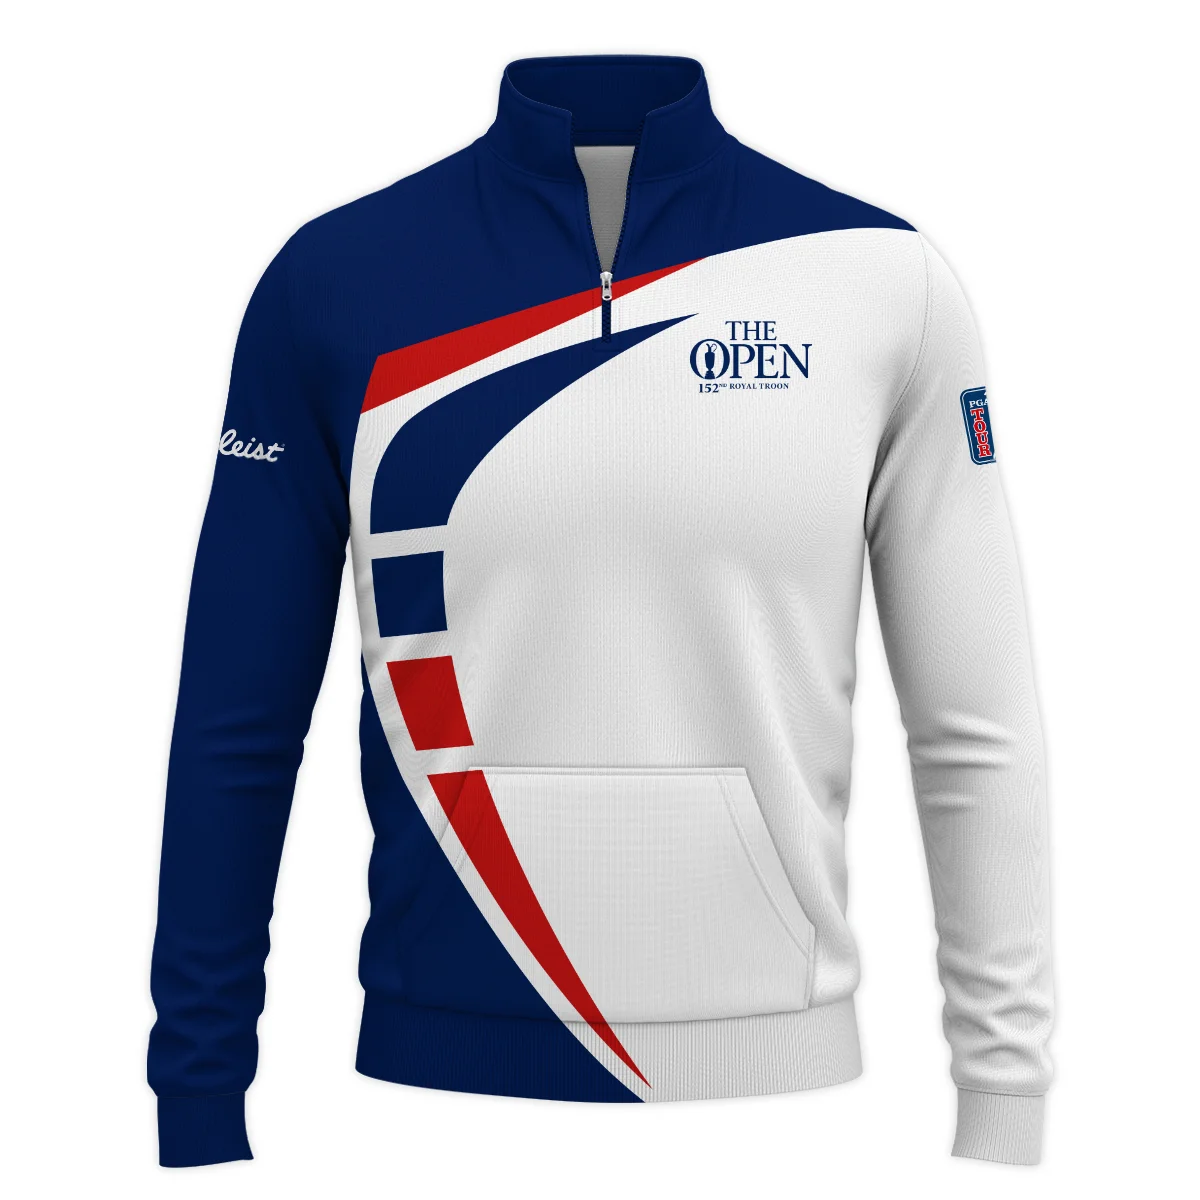 152nd Open Championship Titleist White Blue Red Pattern Background Performance Quarter Zip Sweatshirt With Pockets All Over Prints HOTOP270624A03TLTS